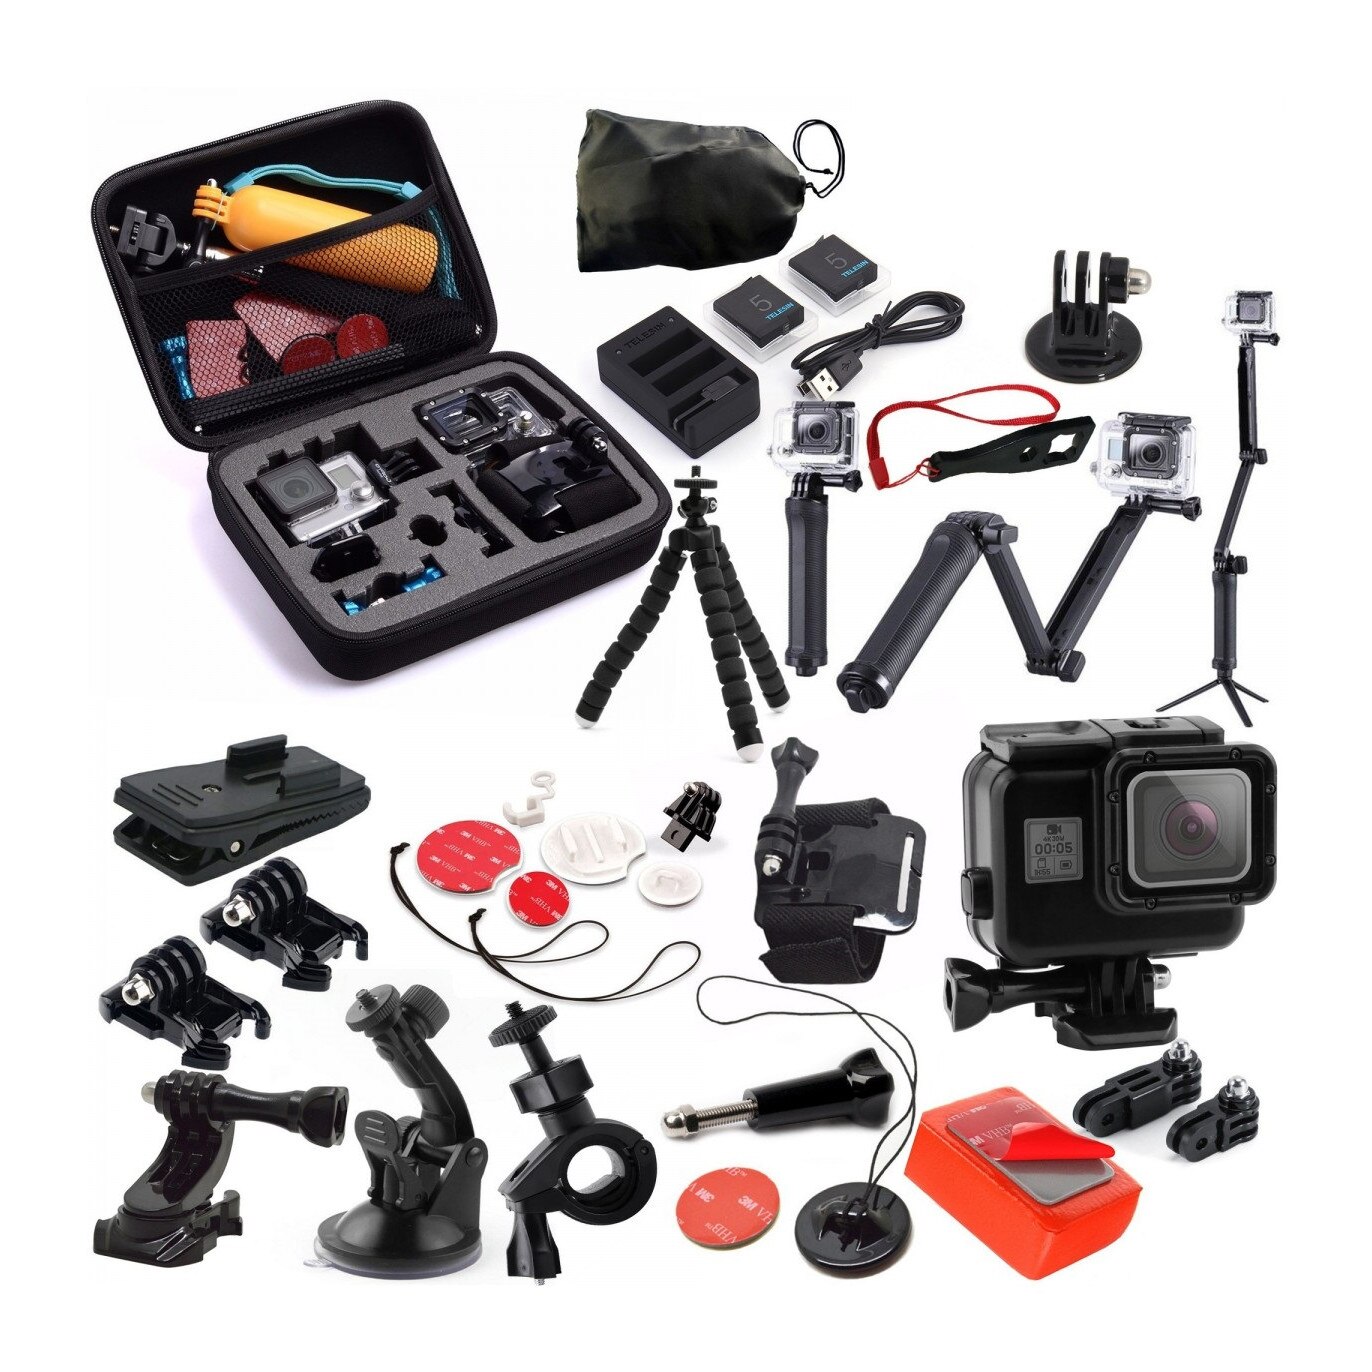 complement bed The actual Pachet Accesorii Compatibile Gopro Hero 5/6/7 Black - Geanta, Baterii, Carcasa  Subacvatica - eMAG.ro